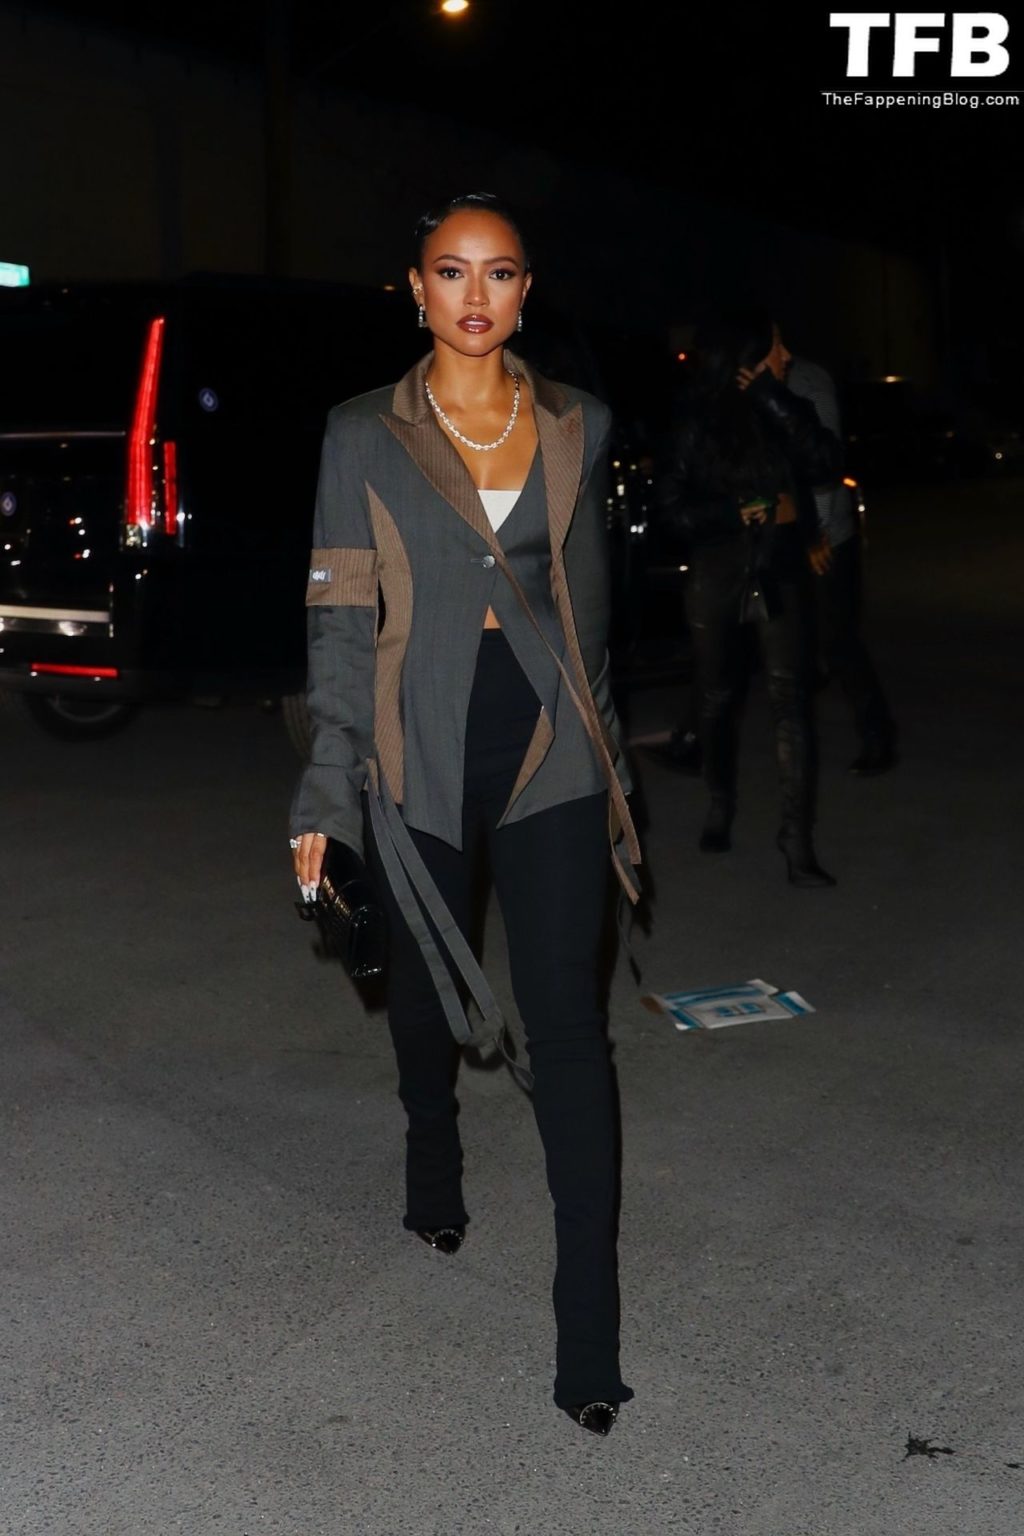 Karrueche Tran Sexy The Fappening Blog 21 1024x1536 - Karrueche Tran Shows Off Her Toned Abs in NYC (26 Photos)